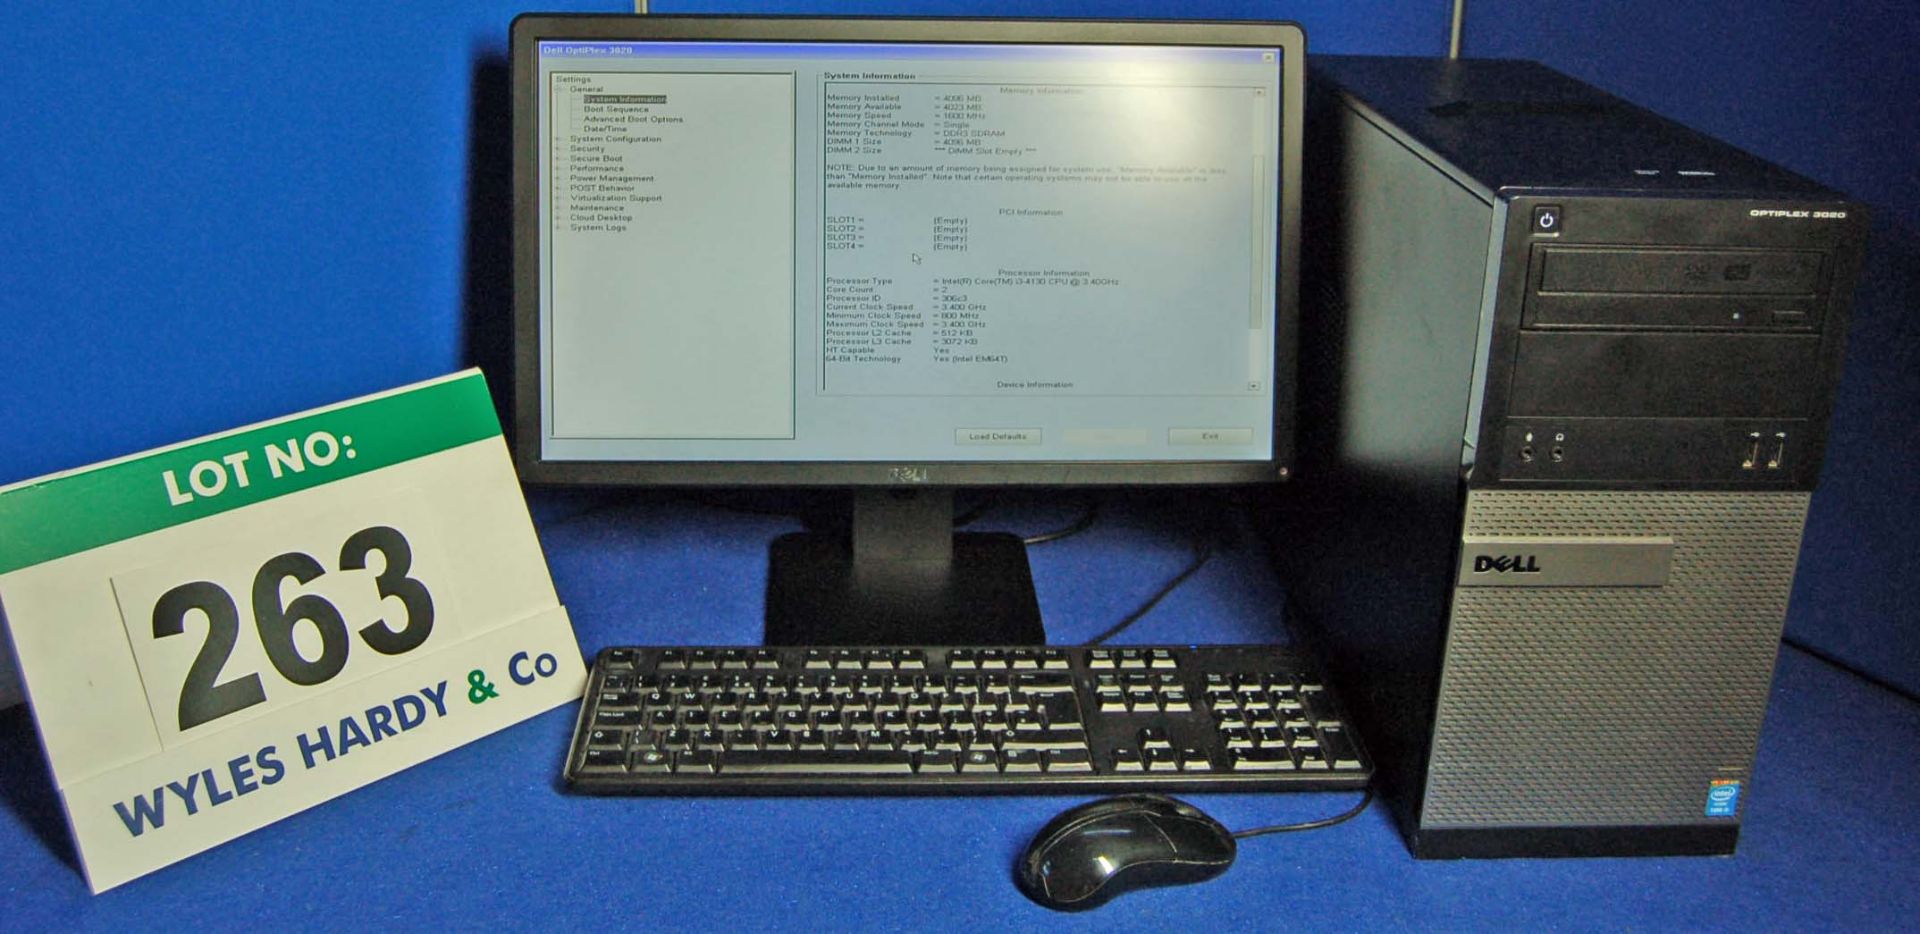 A DELL OptiPlex 3020 INTEL Core i3 3.4Ghz Minitower Personal Computer with 250GB Hard Disc Drive,